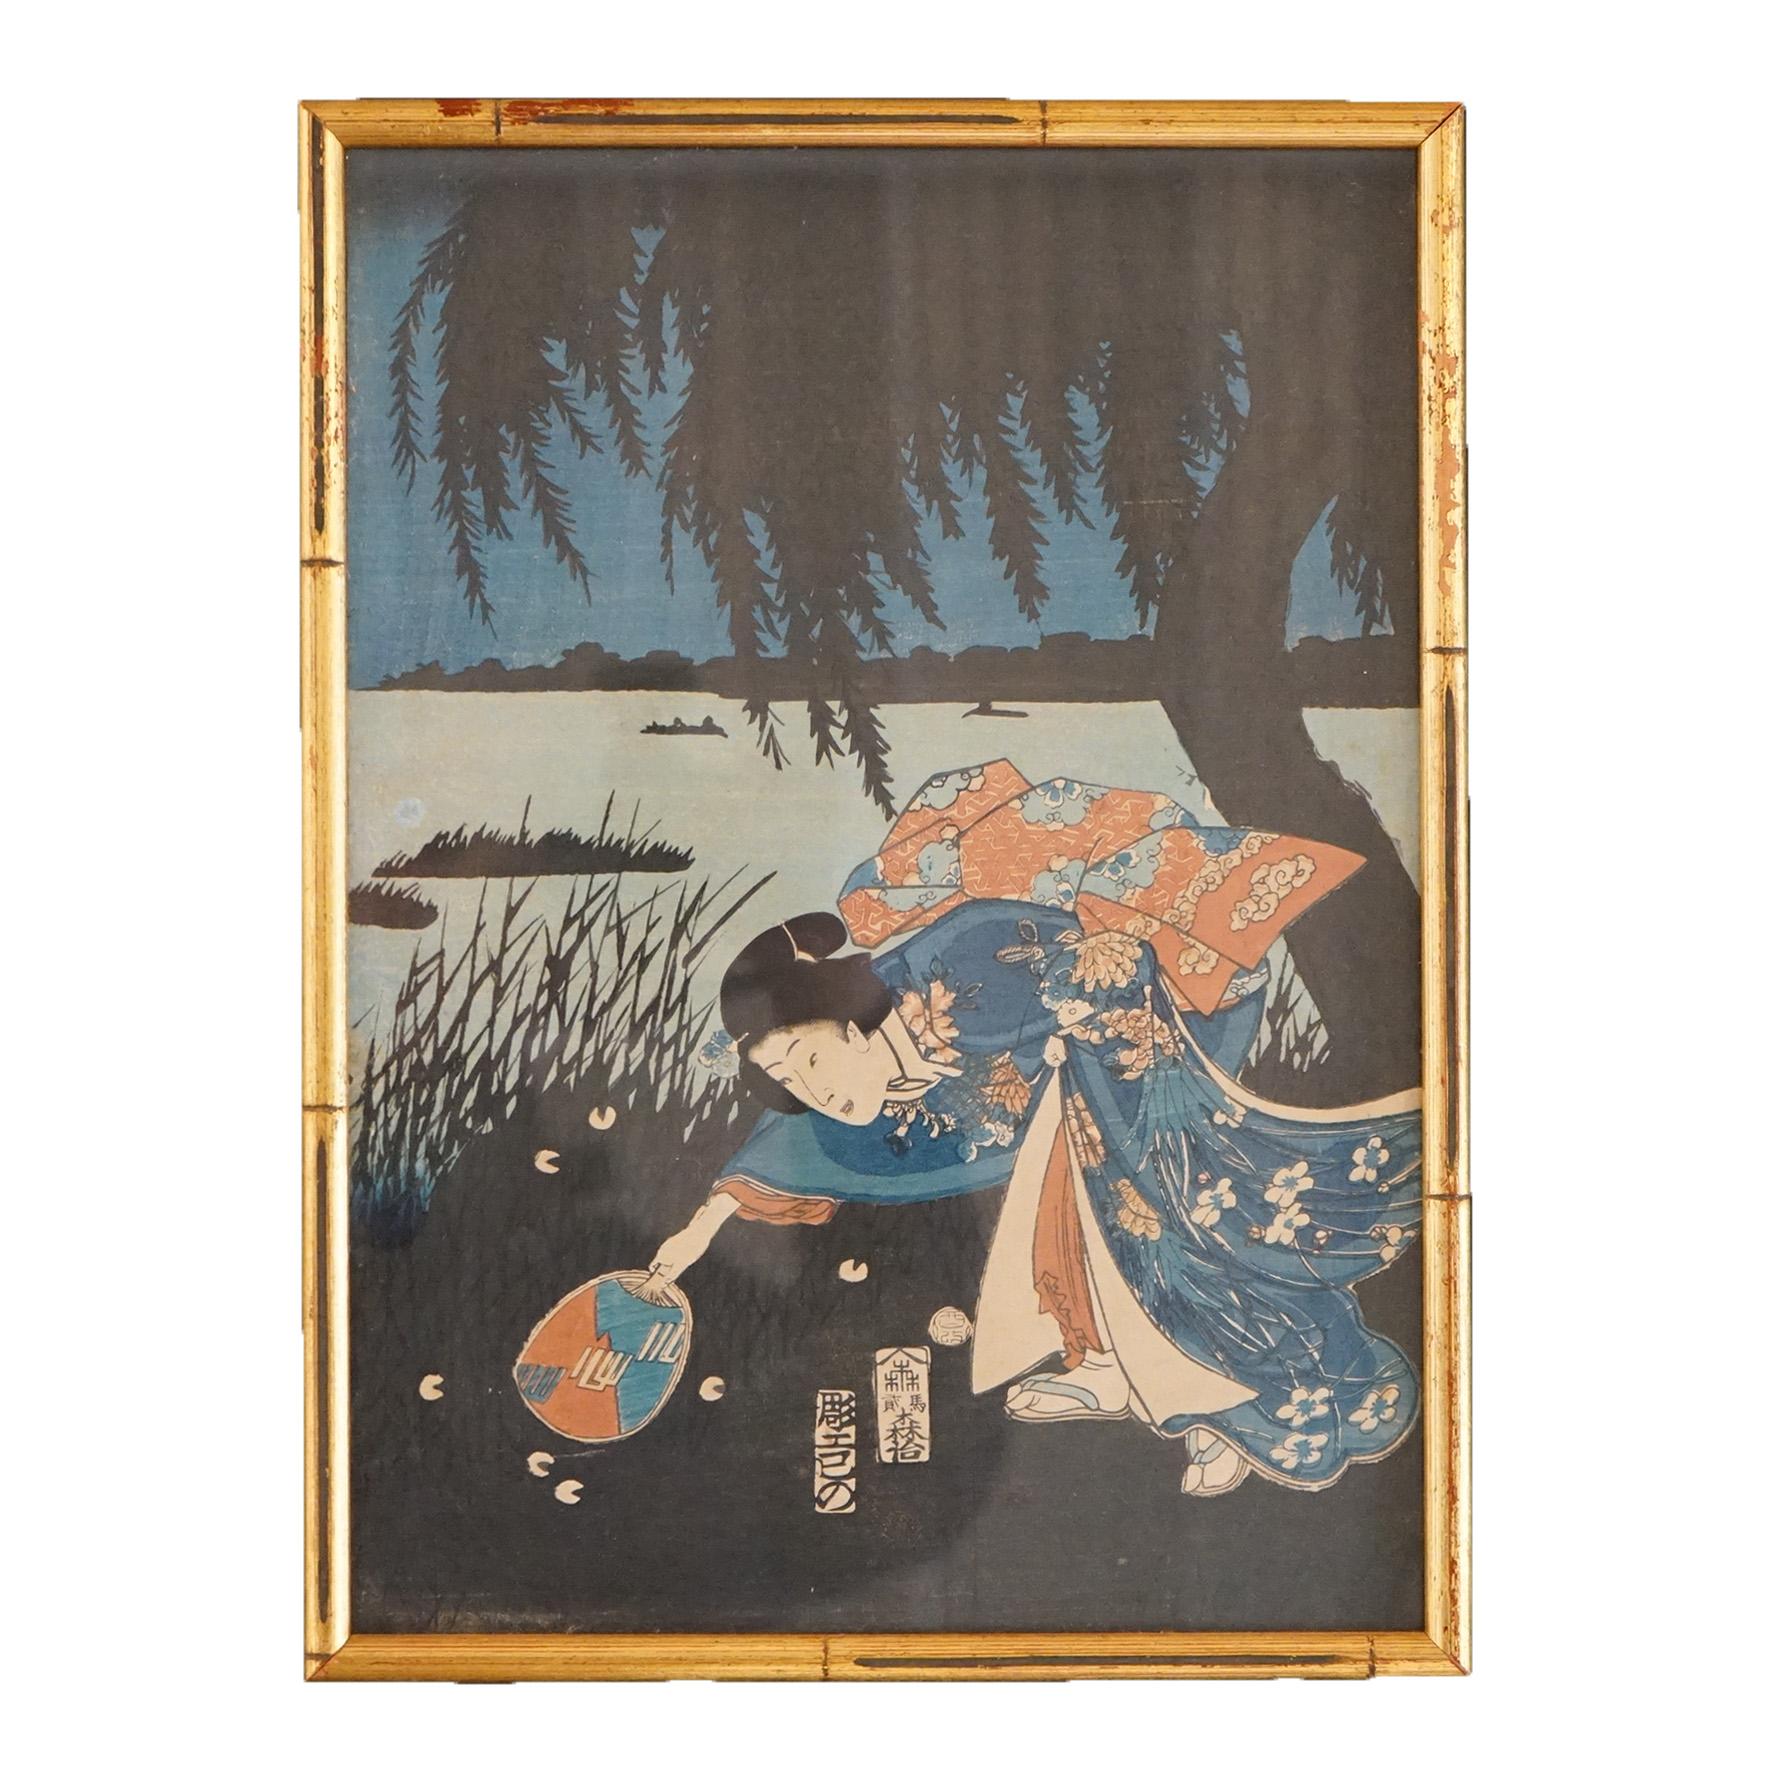 Two Japanese Woodblock Gere Prints with Figures by Utagawa Hiroshige II, Framed, 20thC

Measures- 14.5''H x 10.75''W x 1''D